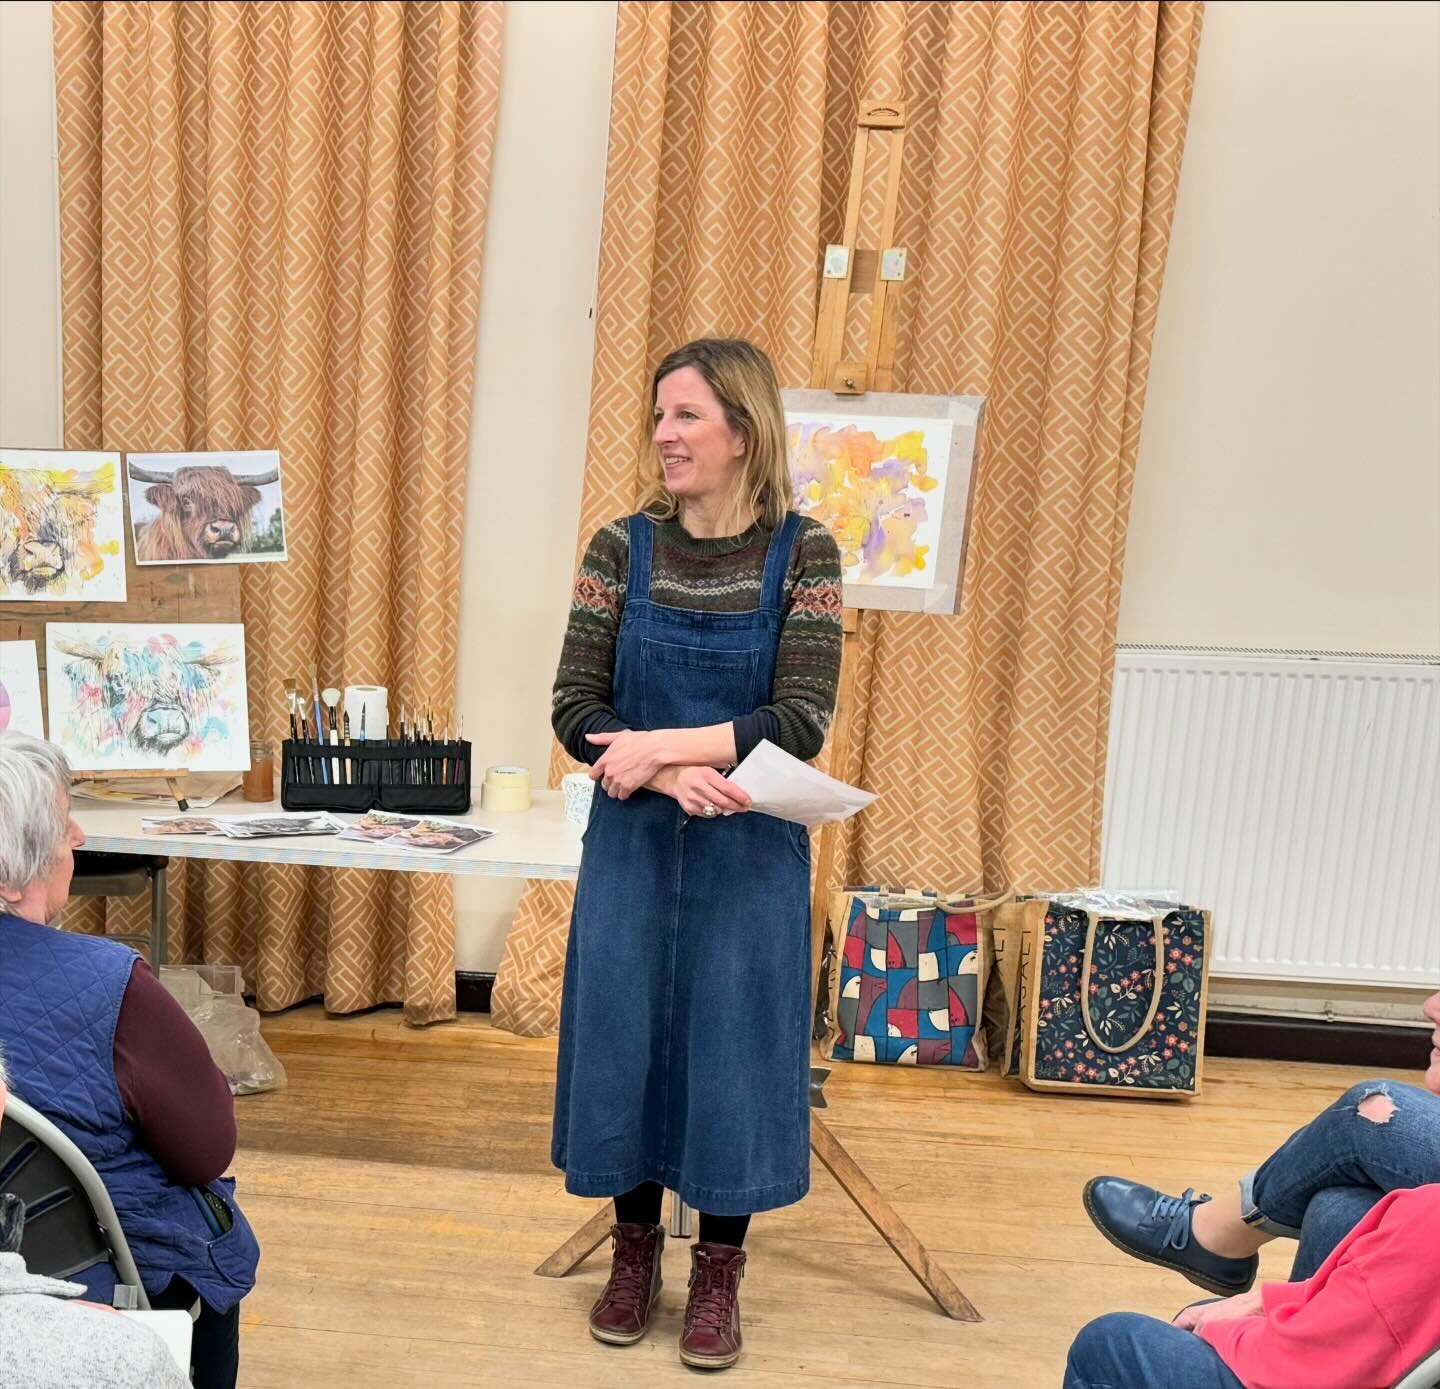 Thursday evening saw a very well attended event. Local artist @annamasseyartist10 came to give a workshop. She took the participants through the process of developing a painting of a Highland cow. Through drawing, applying watercolour and then buildi